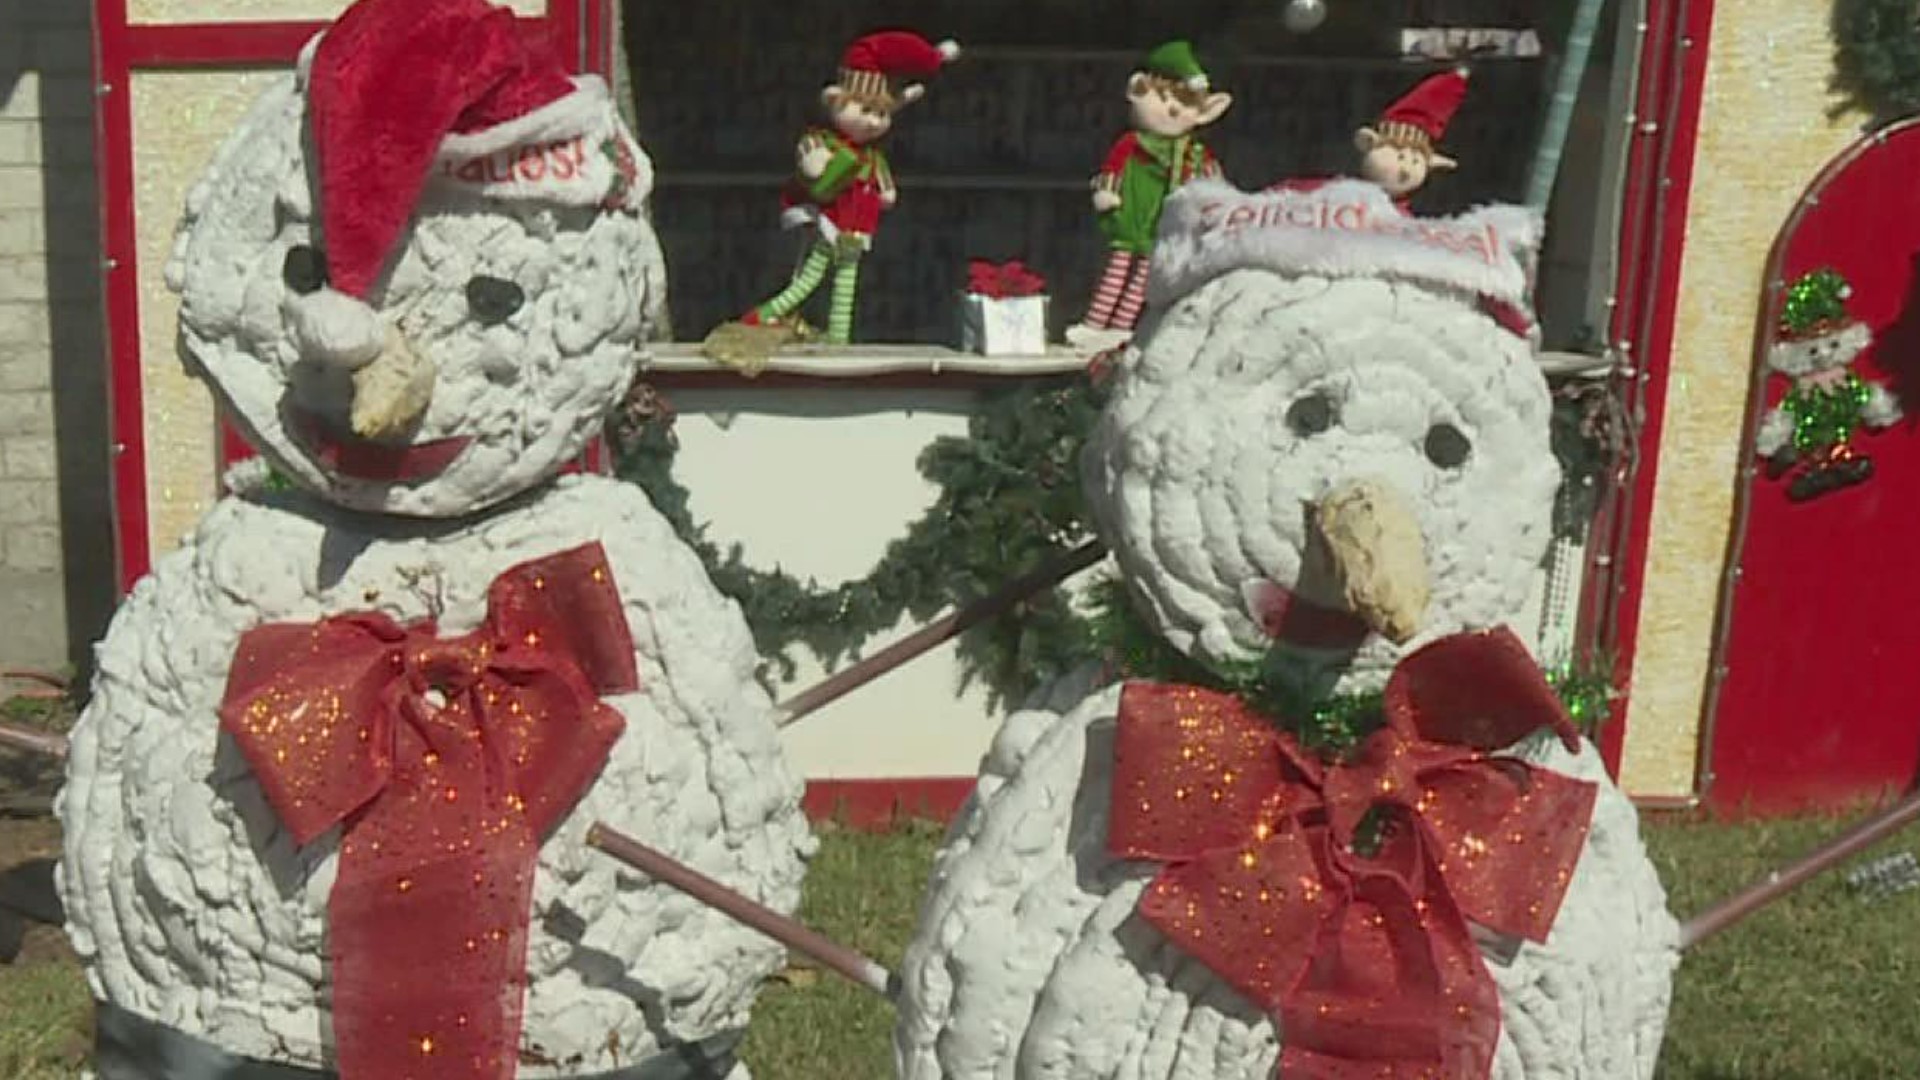 The premiere episode features the Bocanegra and Cox families of Corpus Christi. Both have both been putting up their Christmas displays for over 20 years.